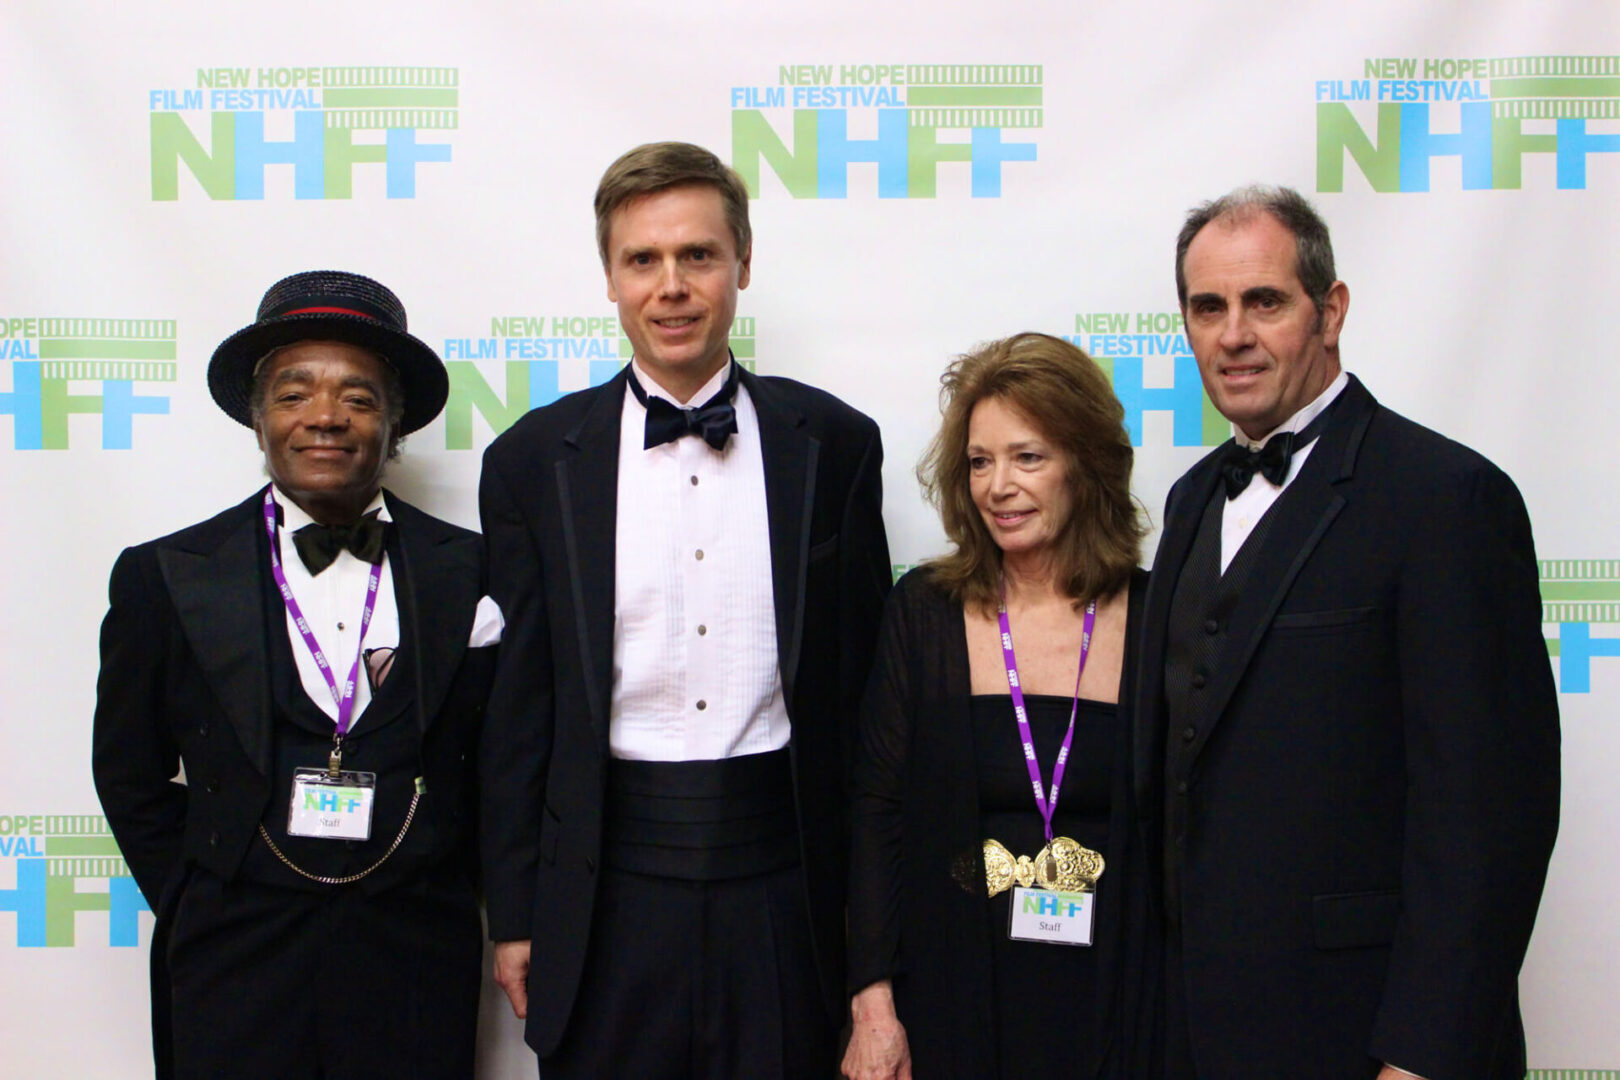 Four people wearing formal wear with a film festival wall banner in the background